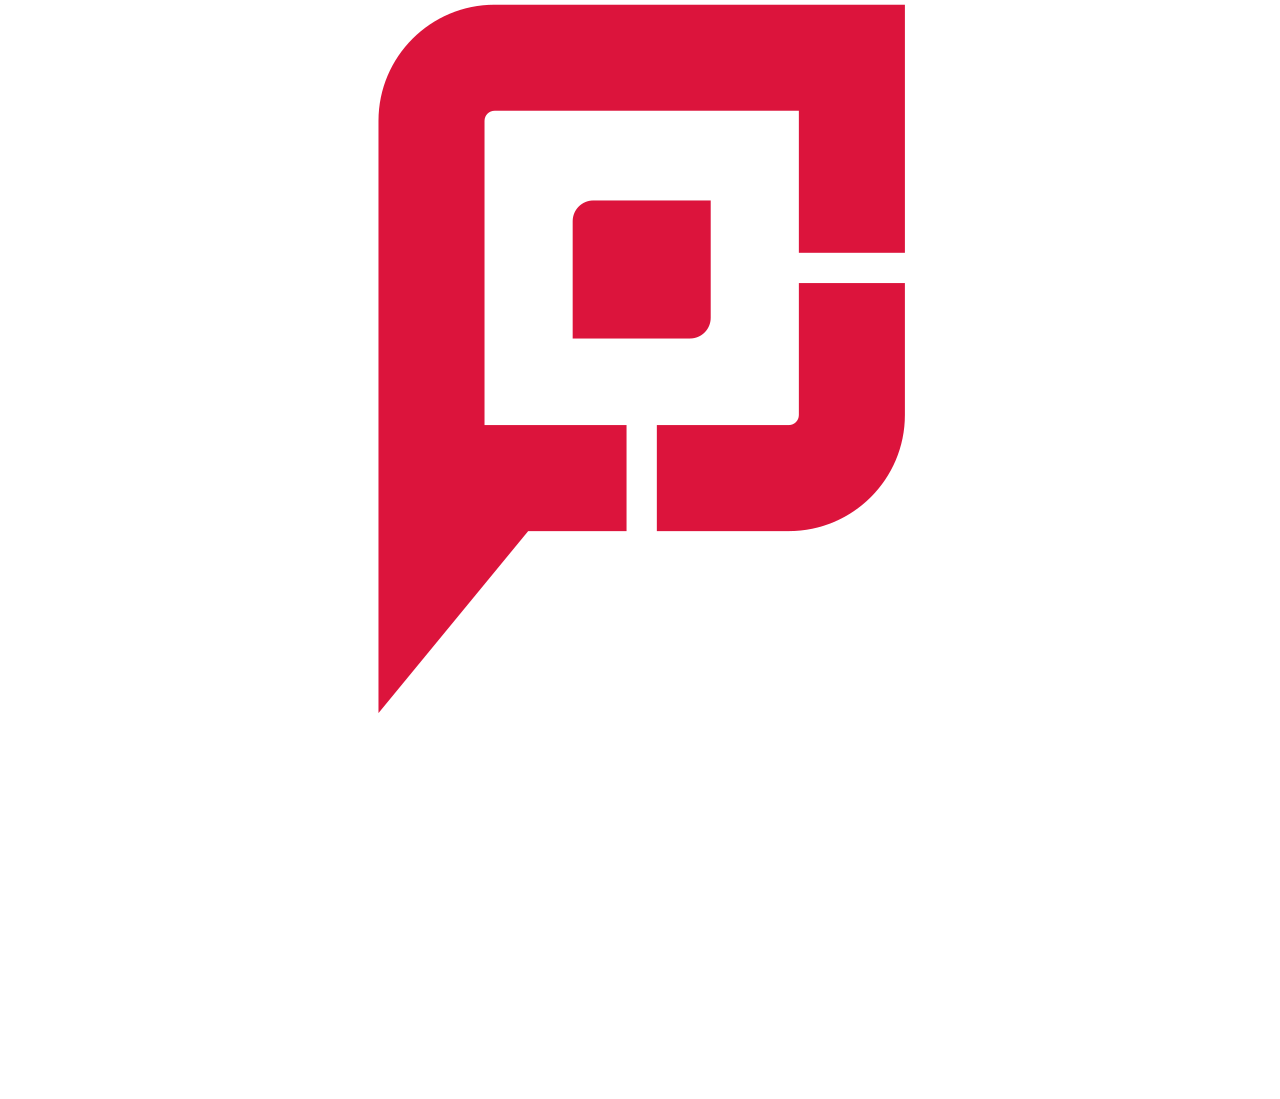 The Paragon Connection